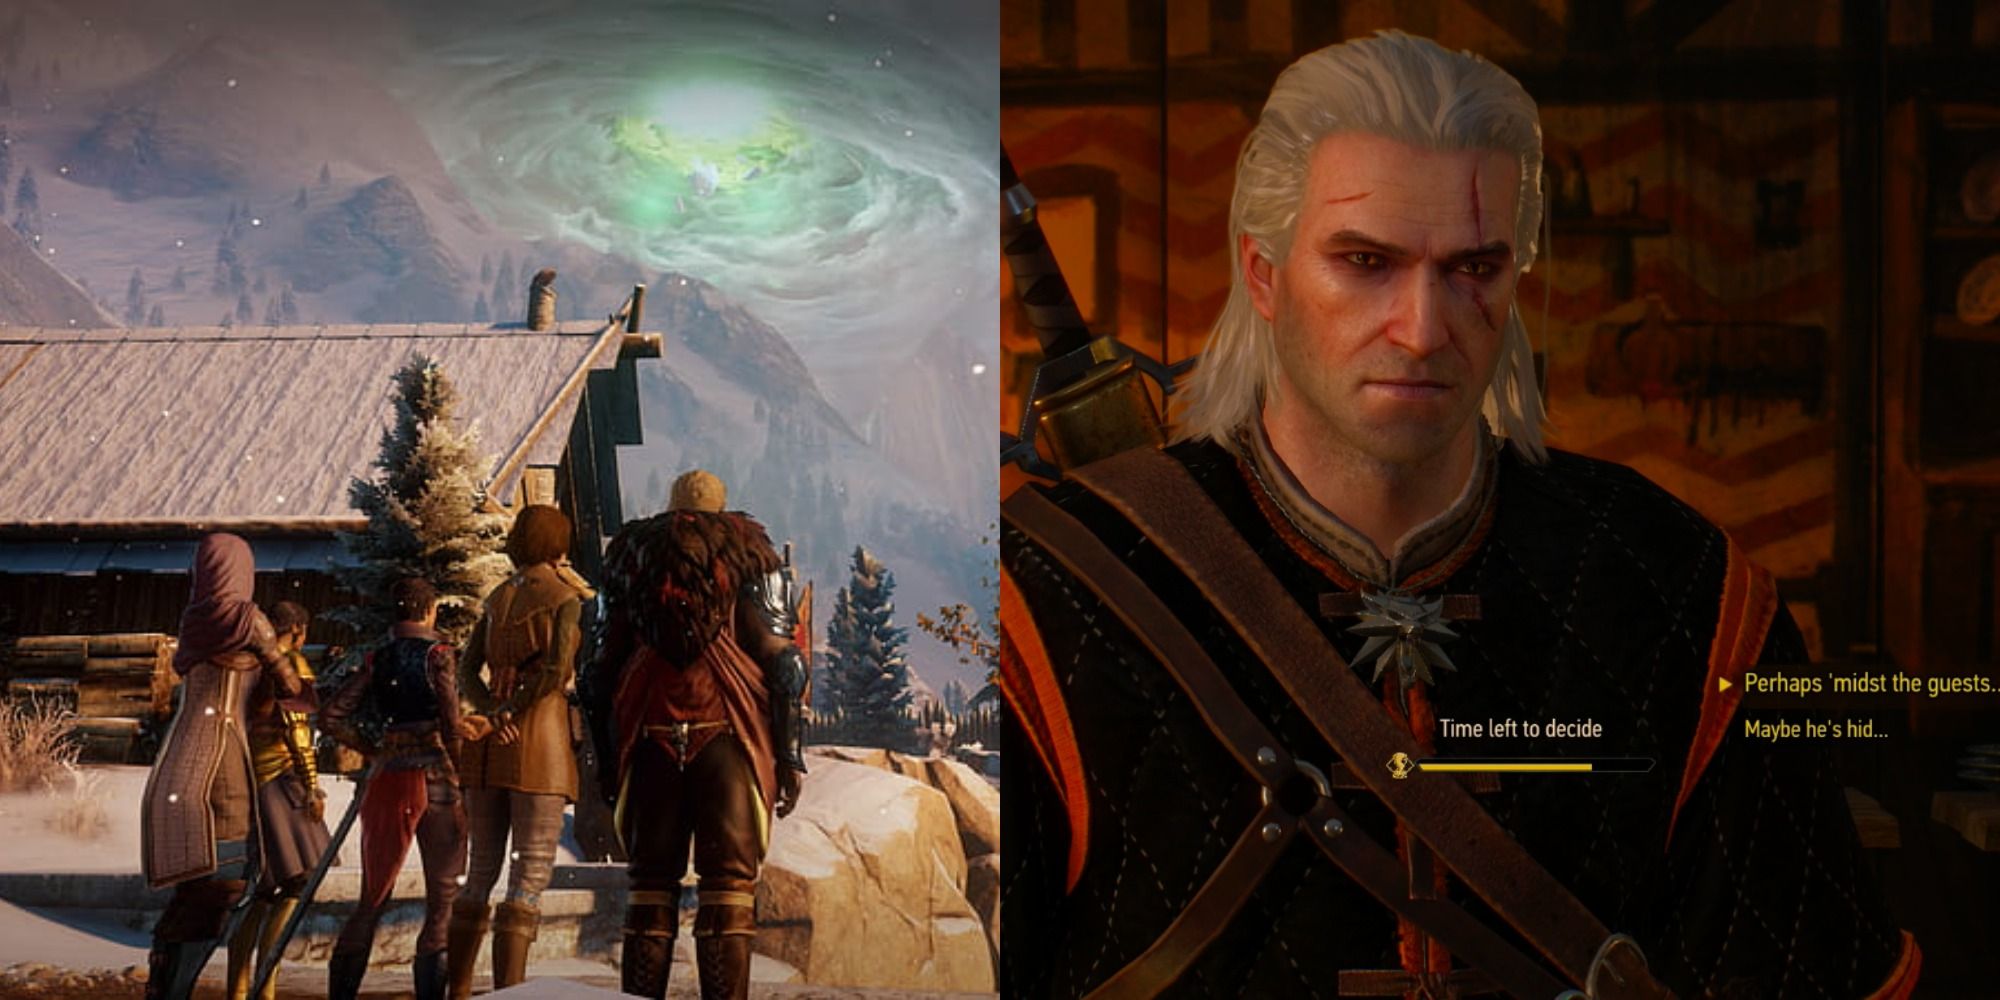 Split image showing the MCs at Haven in DA: Inquisition, and Geralt talking in The Witcher 3